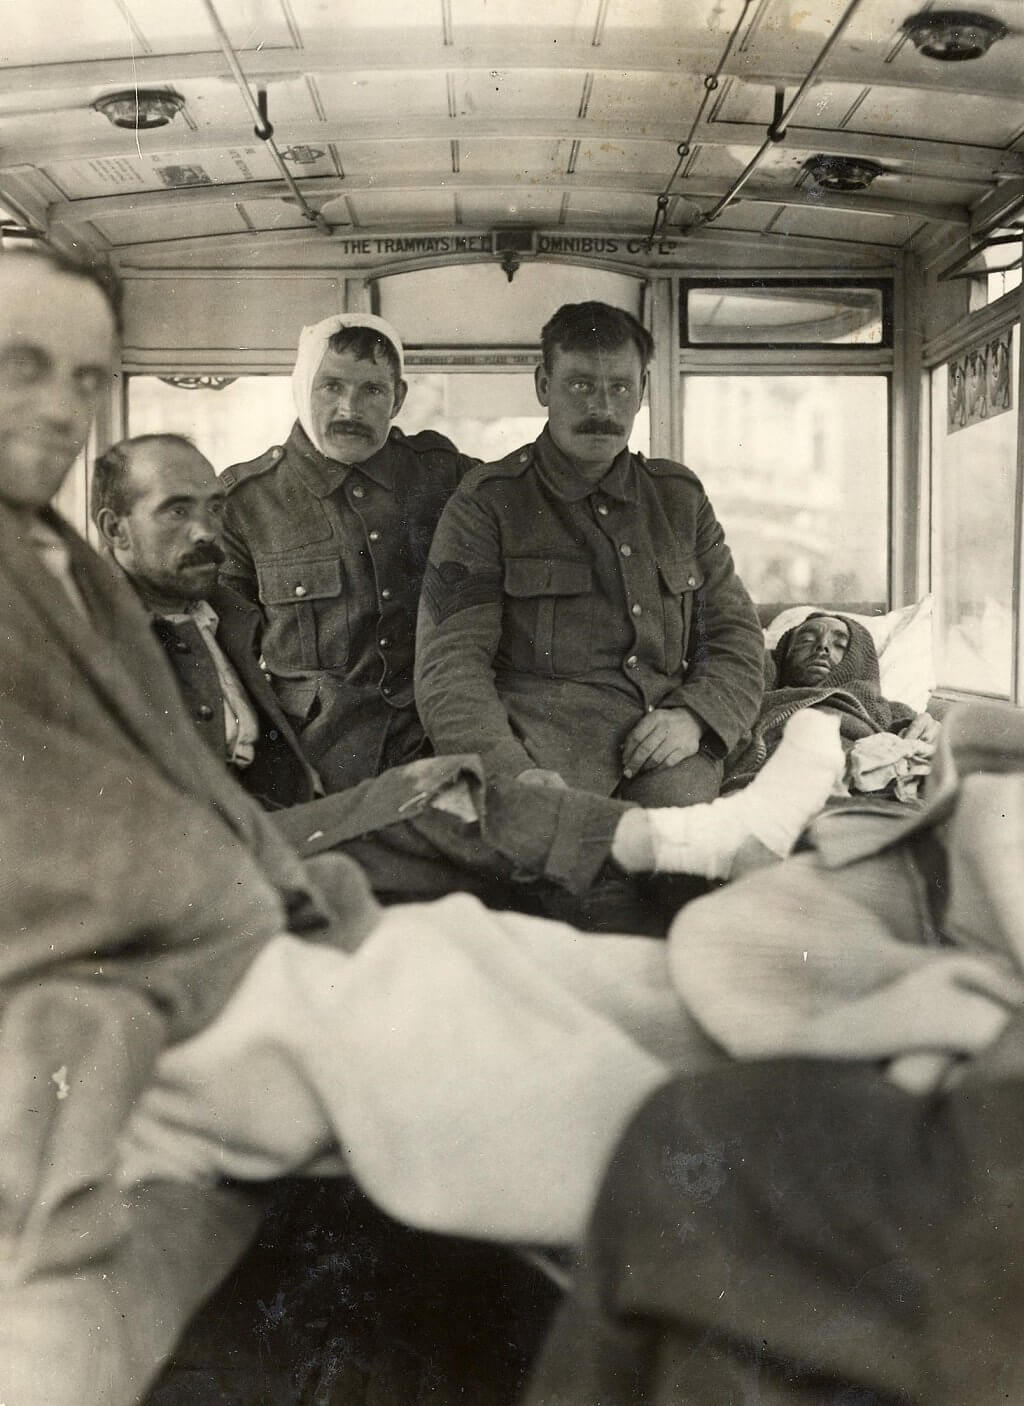 4 An MET Daimler bus being used as a makeshift ambulance in 1914. Copyright London Transport Museum Collection